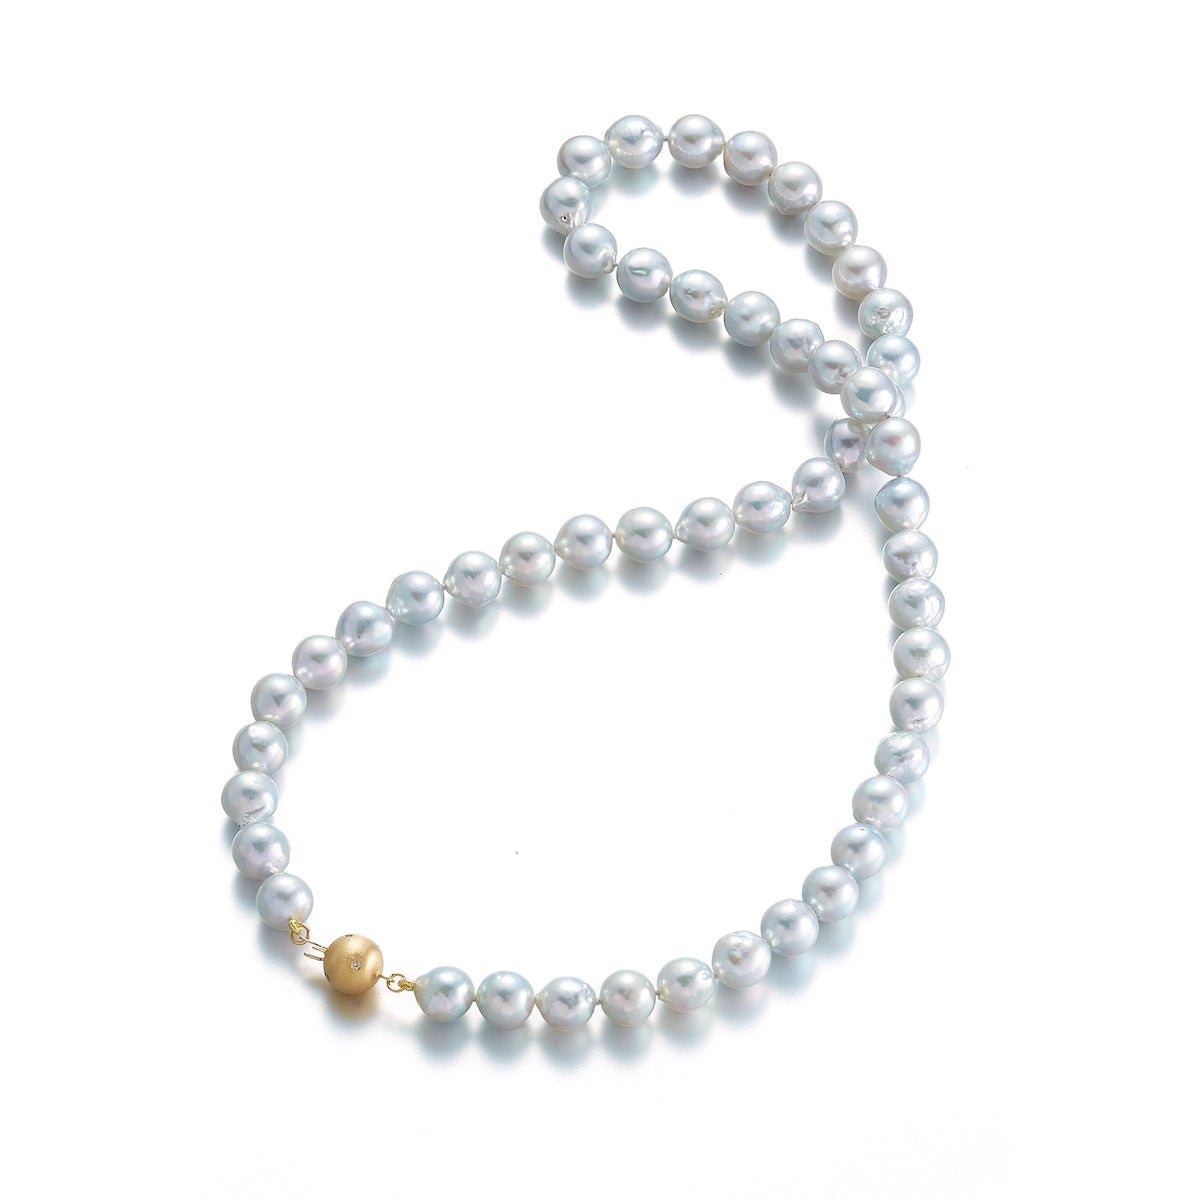 Kaisei Pearl - Royale Necklace K18 Gold Akoya Pearl 8mm